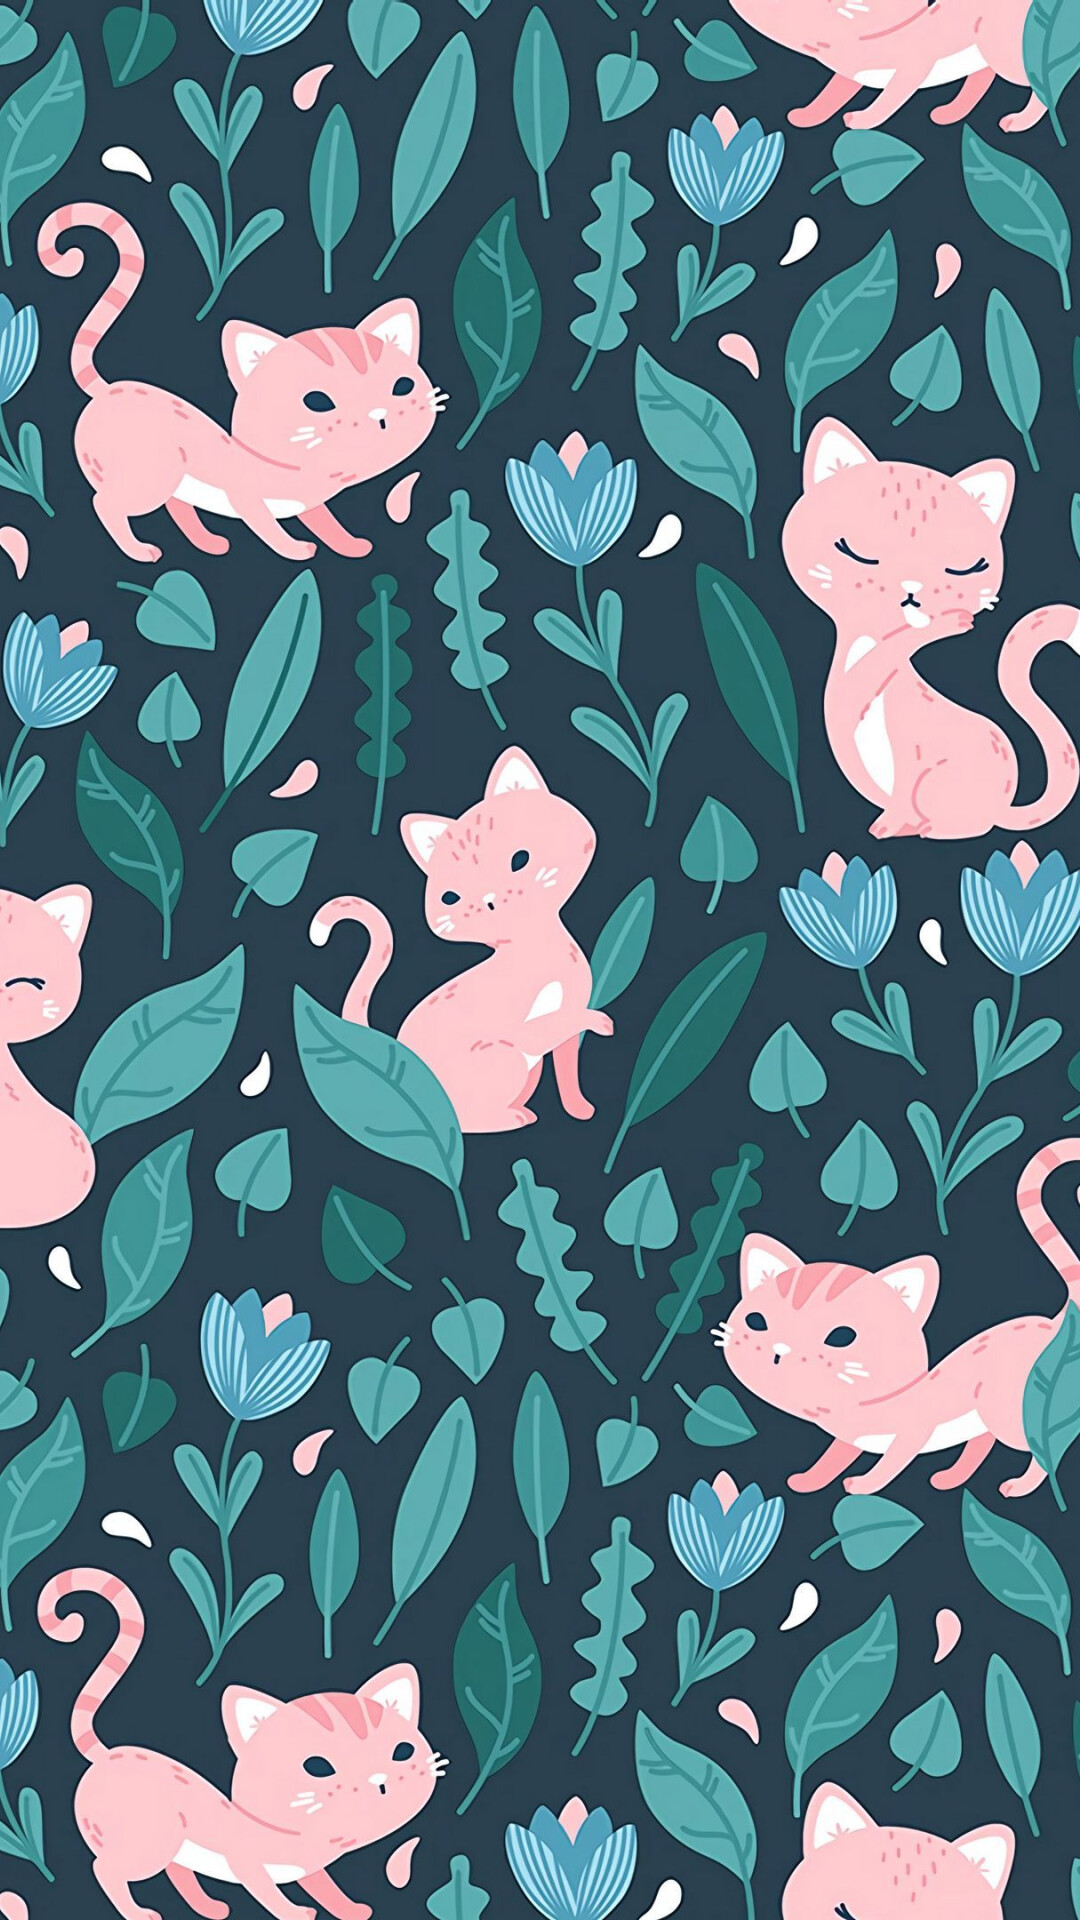 Girly: Pink cats, Leafs, Funny and cute kittens playing in the grass, Floral. 1080x1920 Full HD Background.